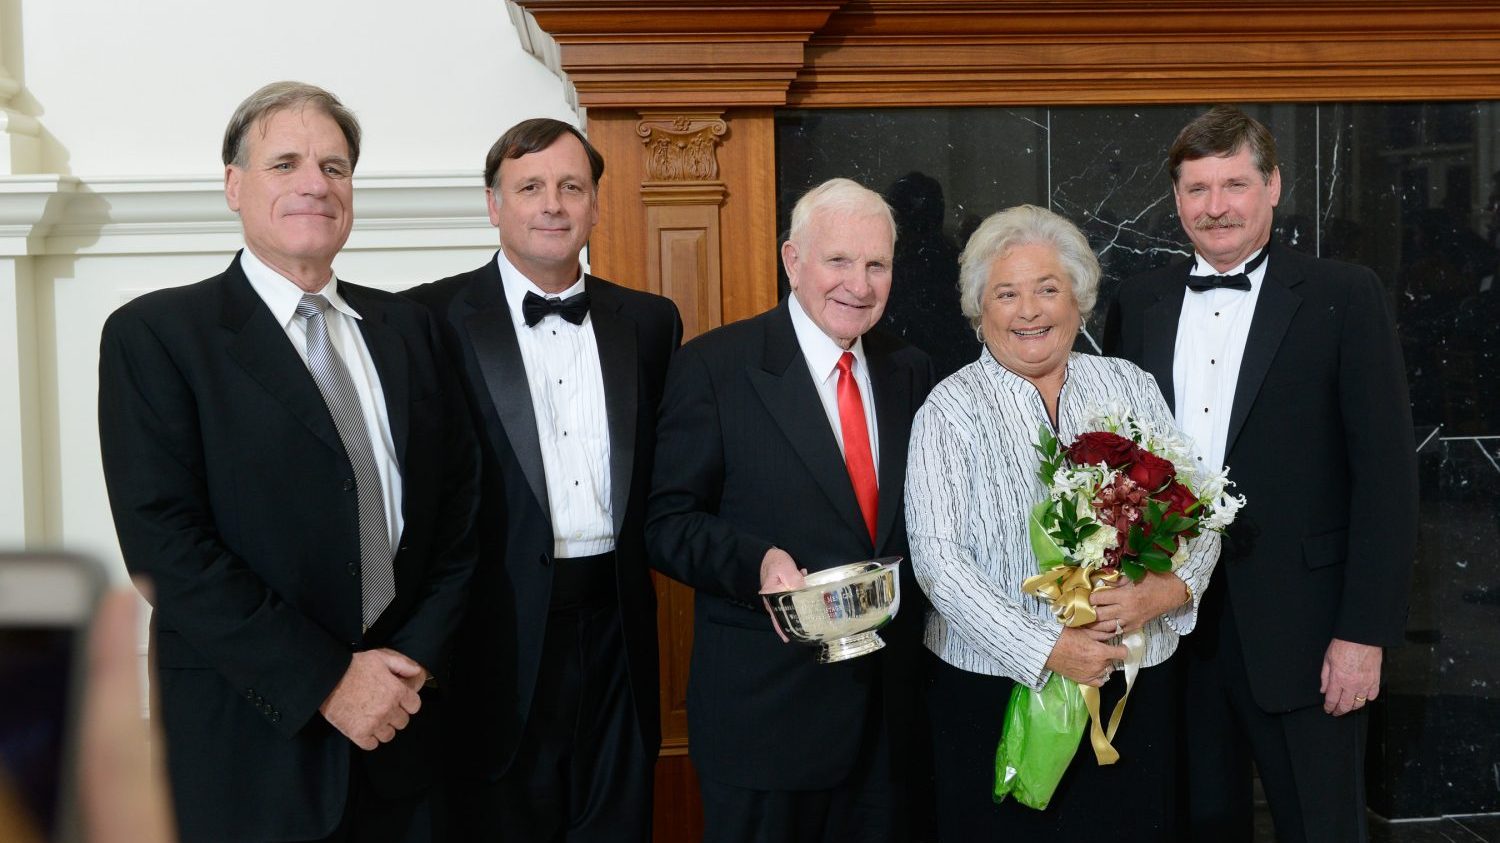 Bill Prestage with his wife and three sons